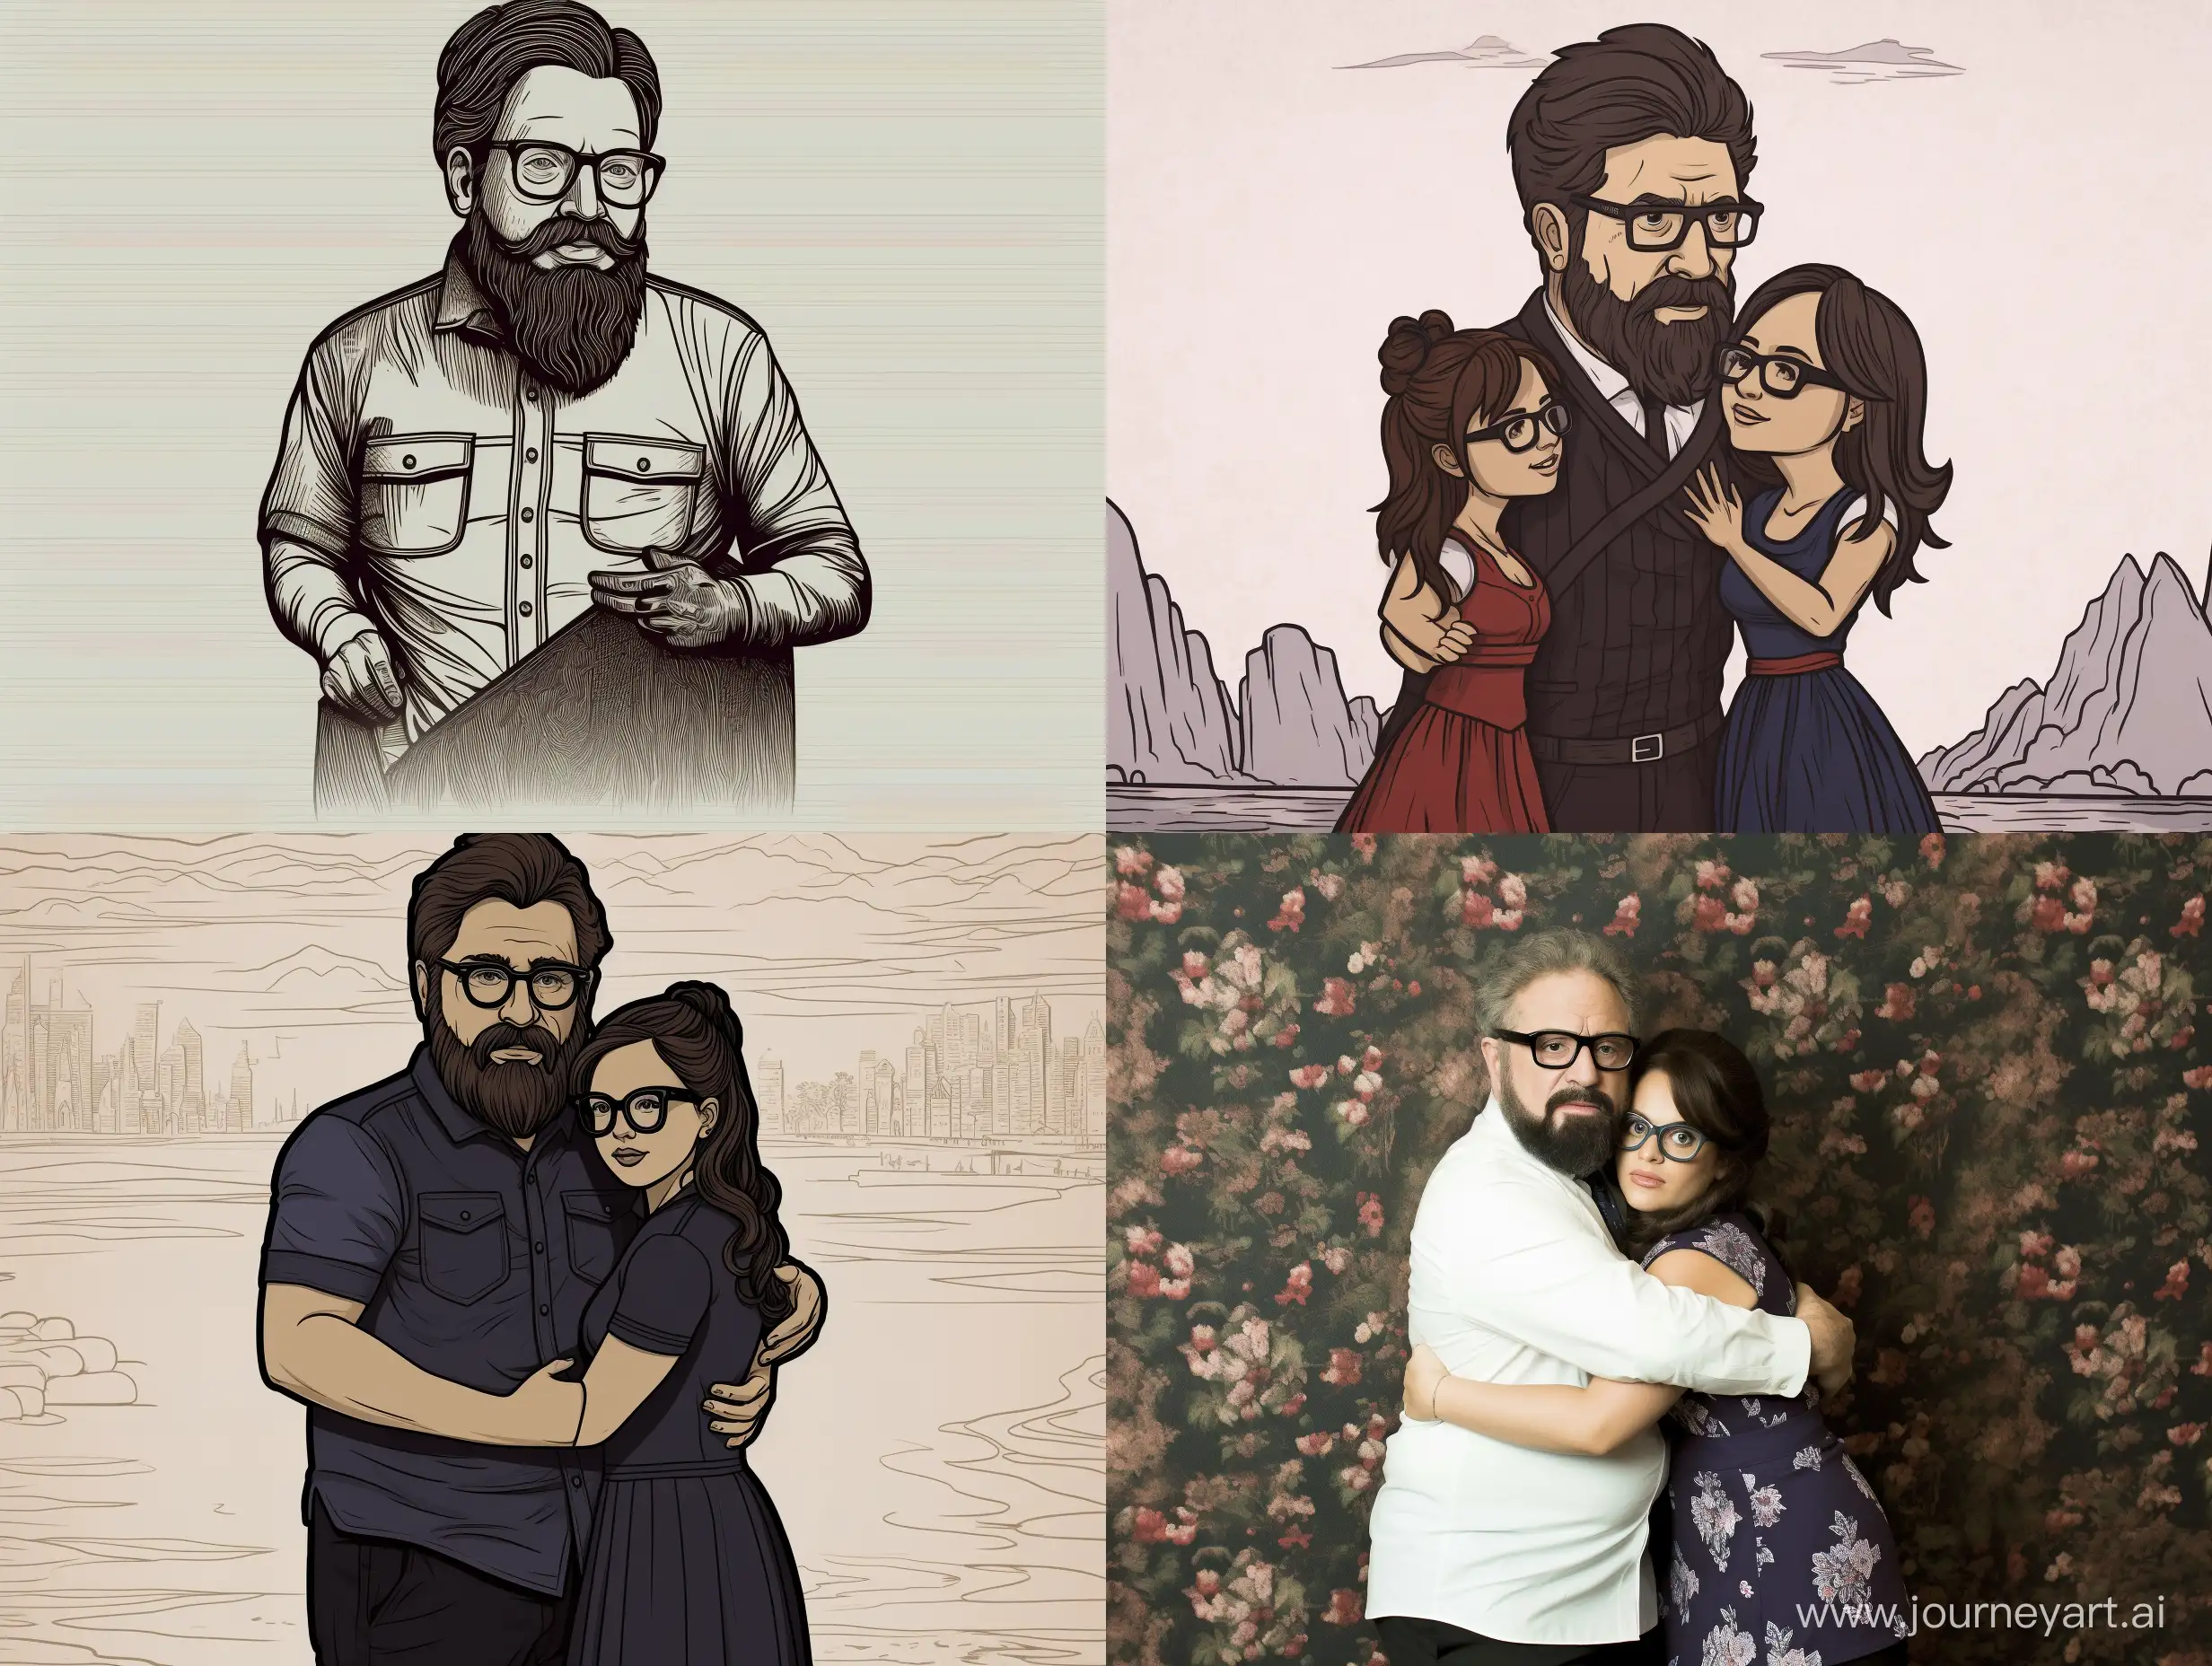 Affectionate-Bearded-Man-Embracing-Two-Girls-in-Elegant-Dresses